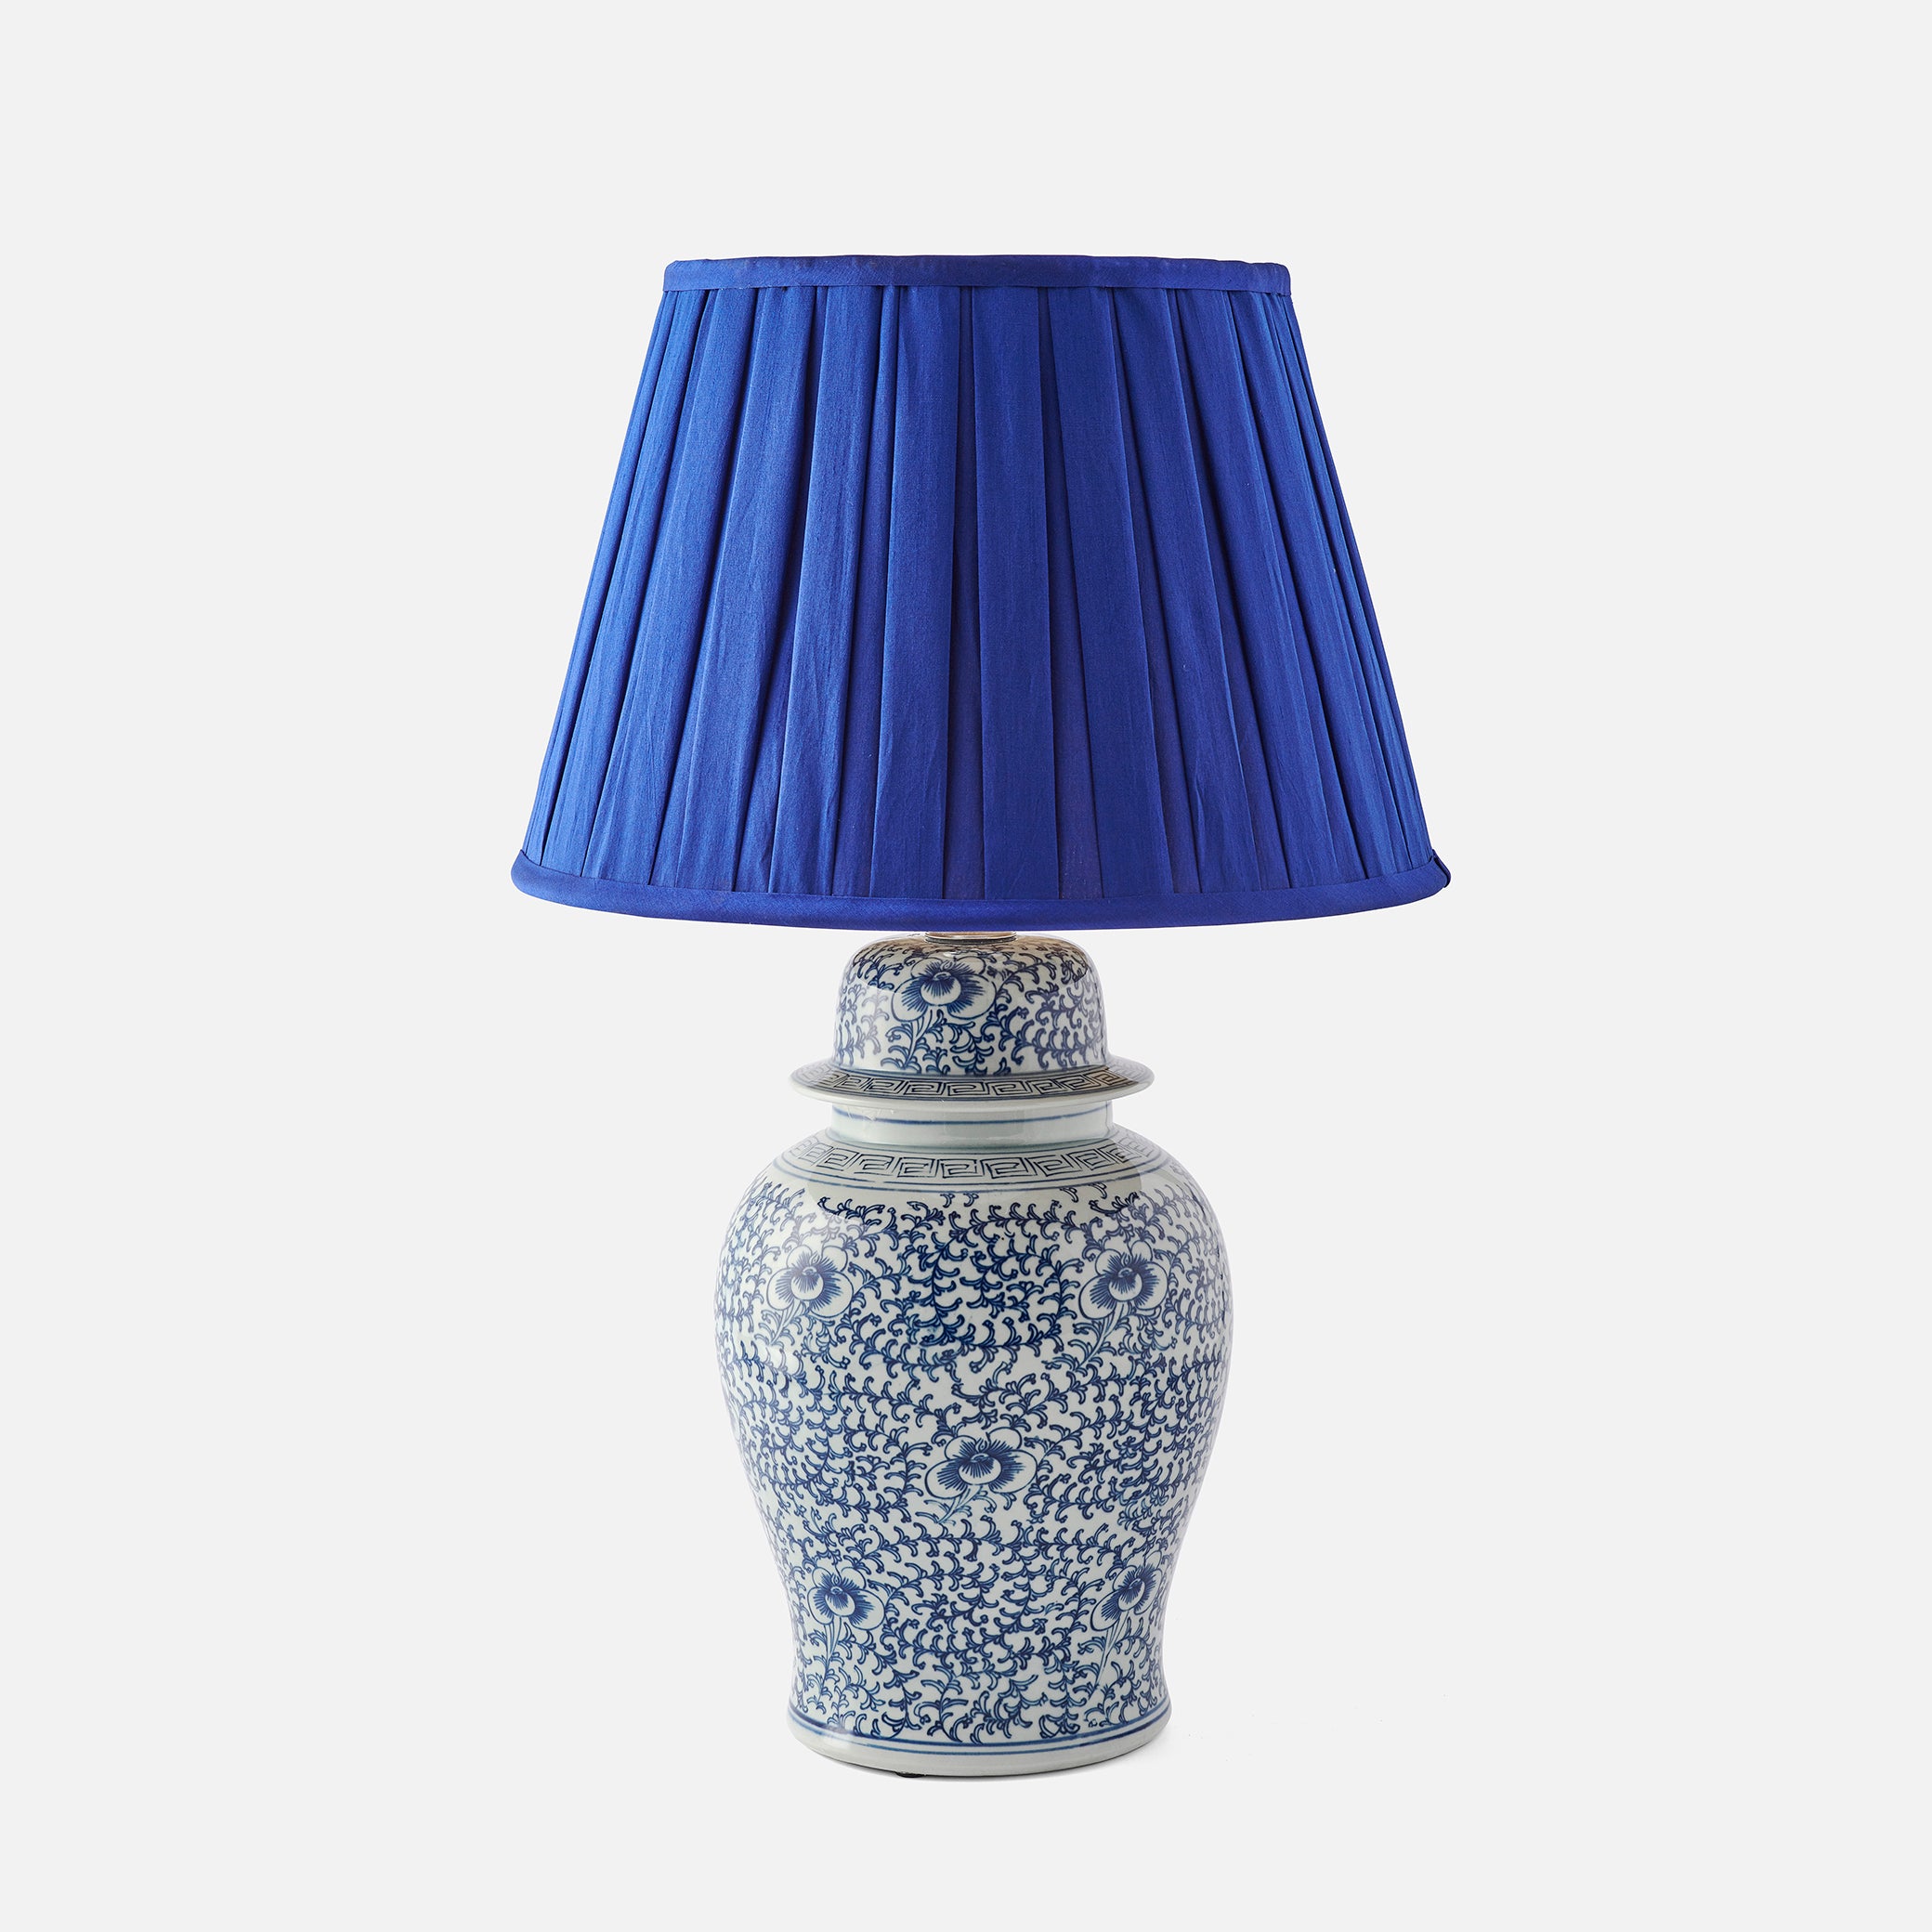 Large Blue and White Decorated Lamp Base